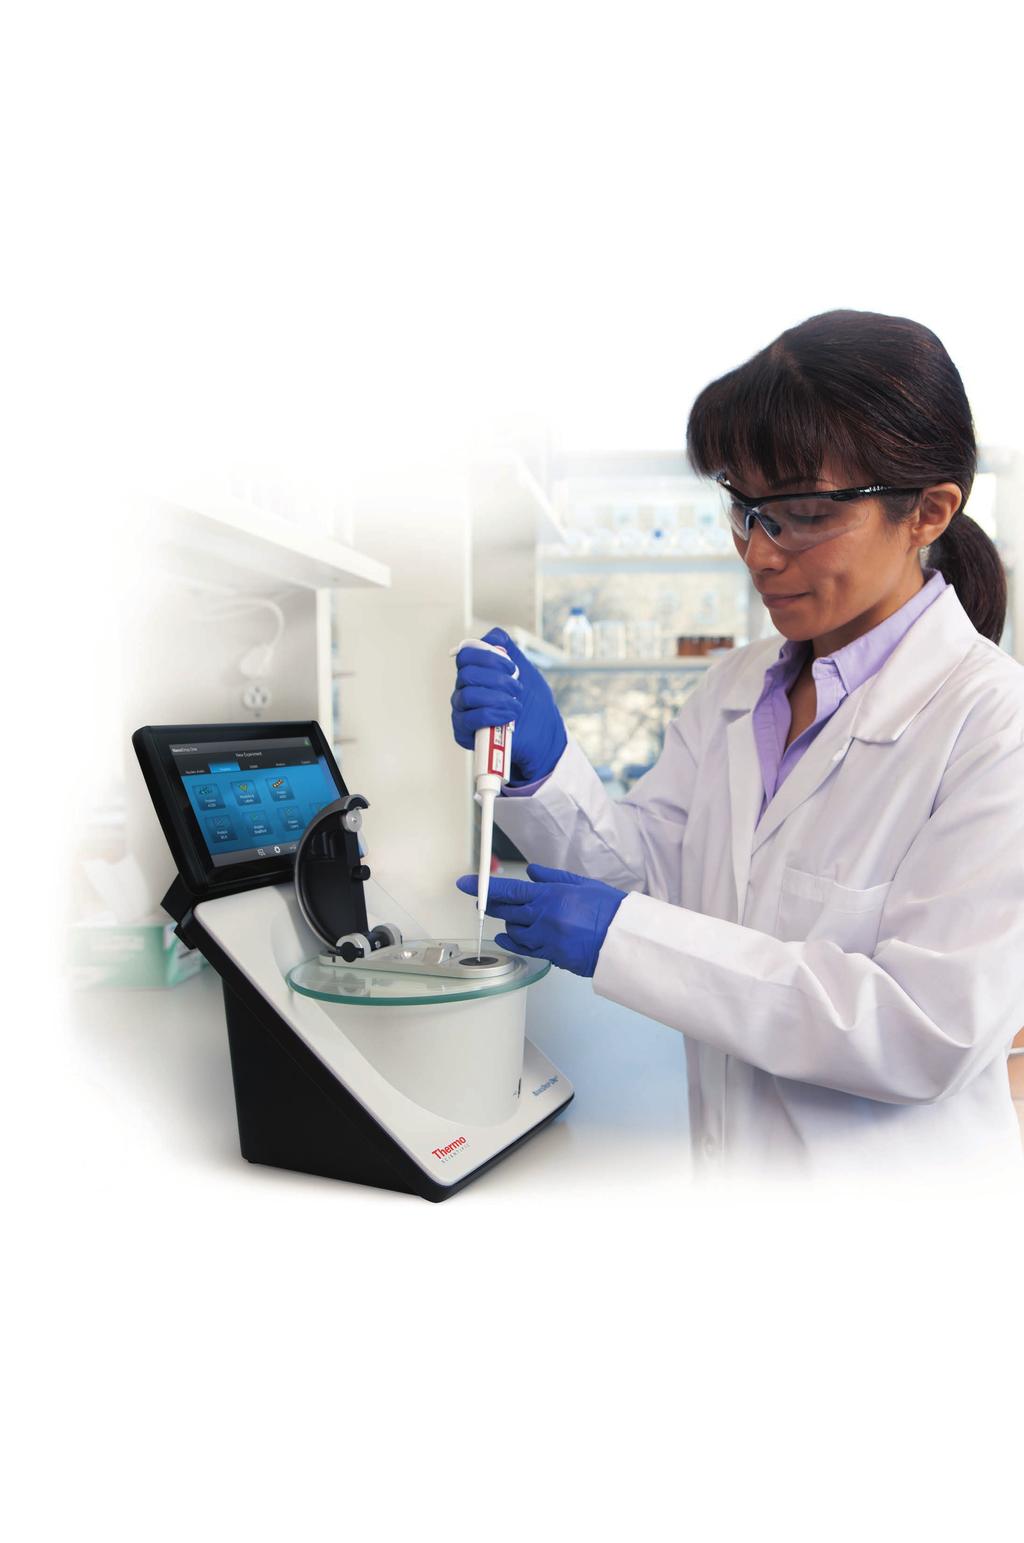 Proceed with confidence Trusted by scientists worldwide, the Thermo Scientific NanoDrop UV-Vis